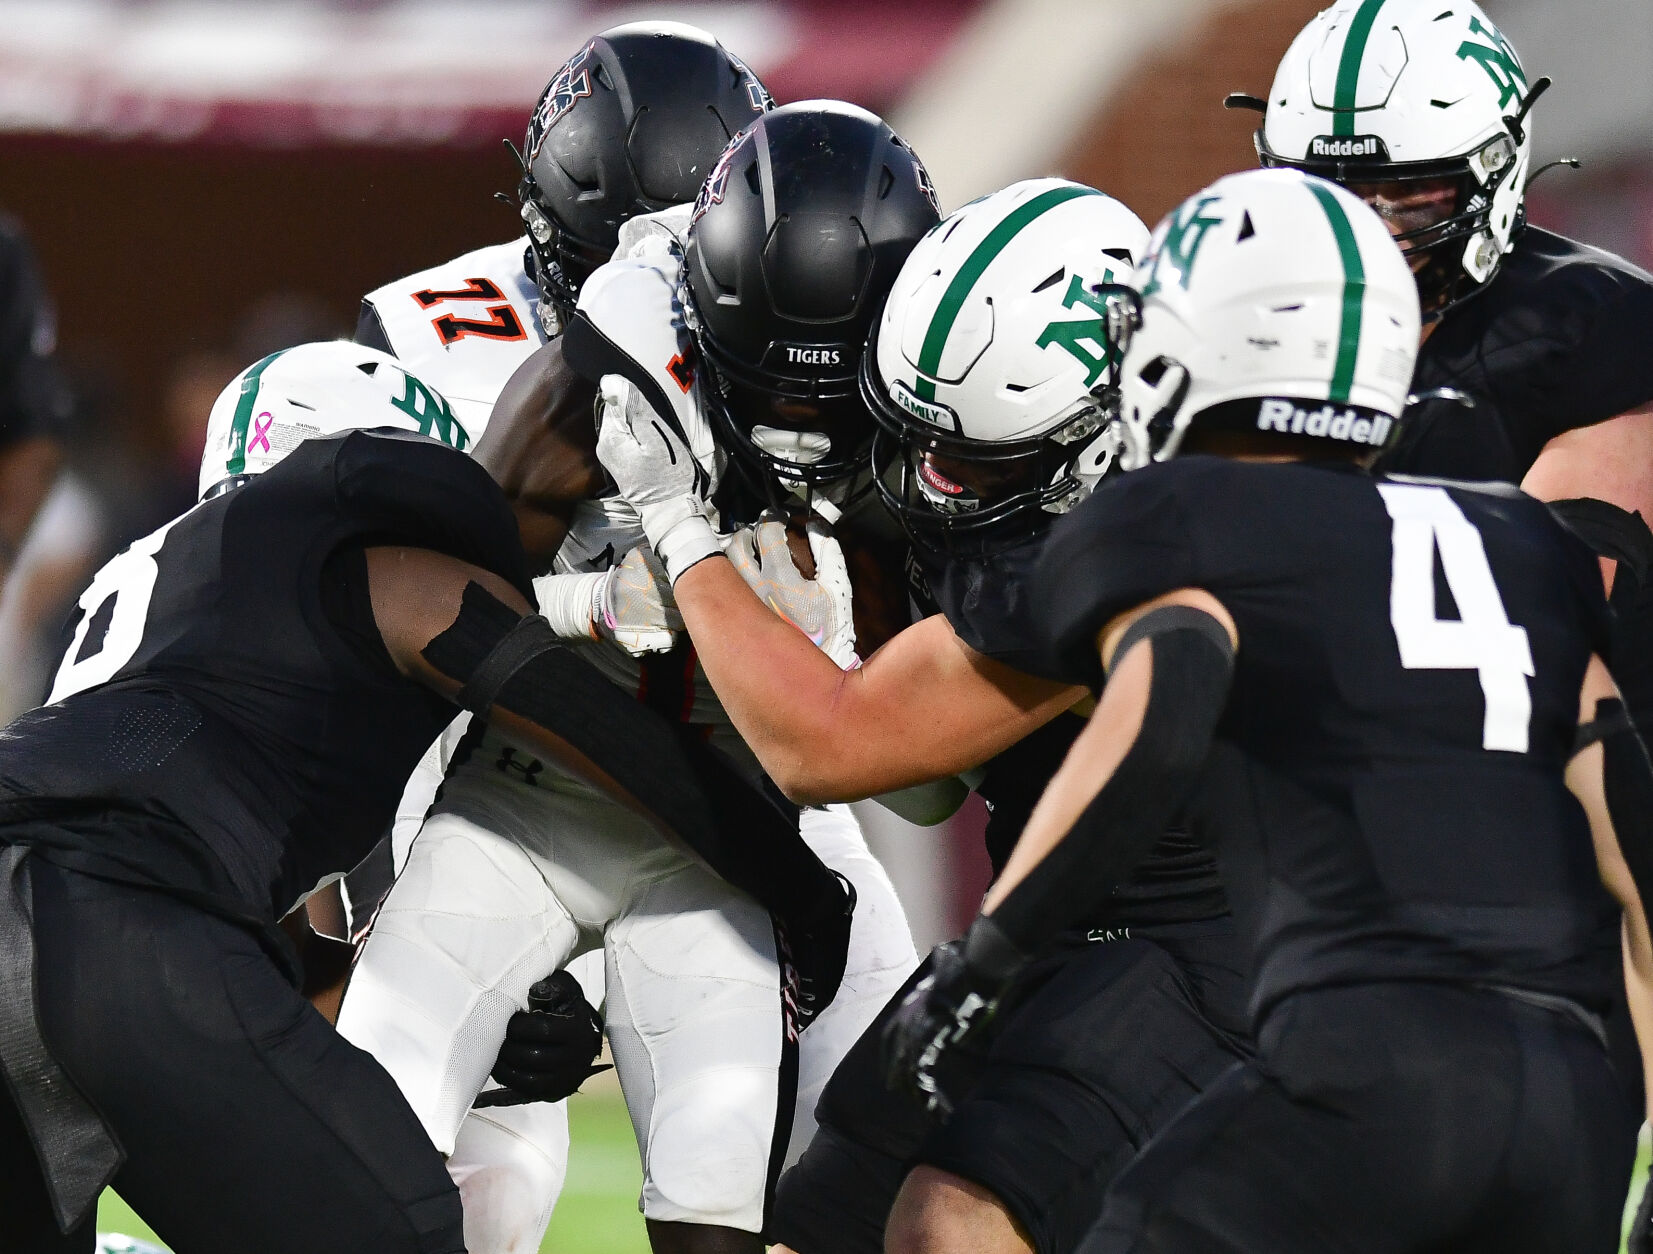 Norman North’s Issac Morgan shines with 14 tackles in impressive performance